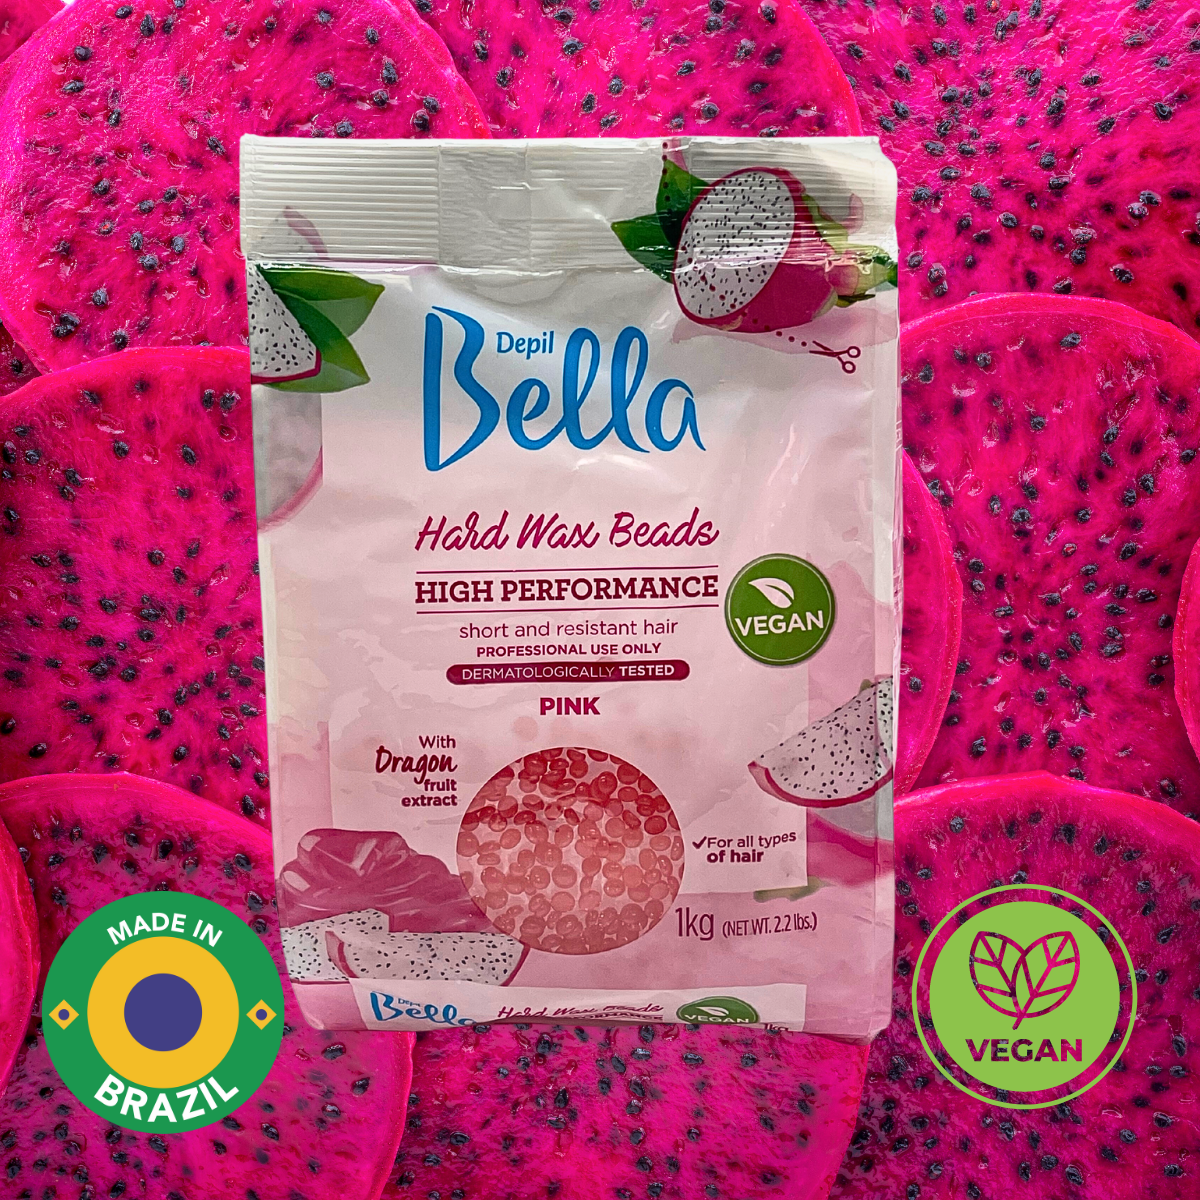 Depil Bella Pink Pitaya Confetti Hard Wax Beads - High-Performance Hair Removal, Vegan 2.2 lbs (20 Units Offer) - Buy professional cosmetics dedicated to hair removal